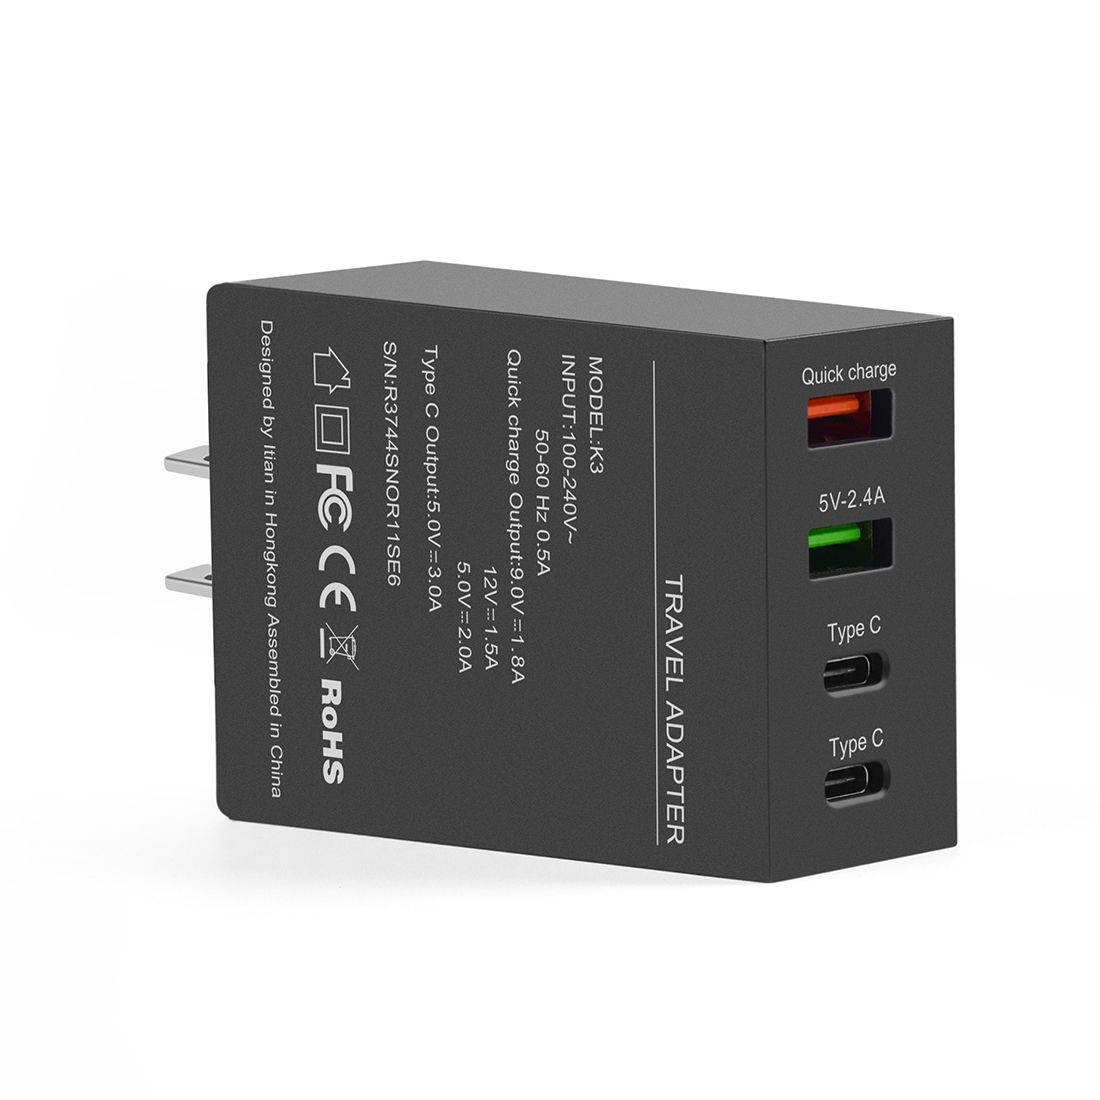 Qc3.0 Type-C x2 4-port USB 50W High Power Charger